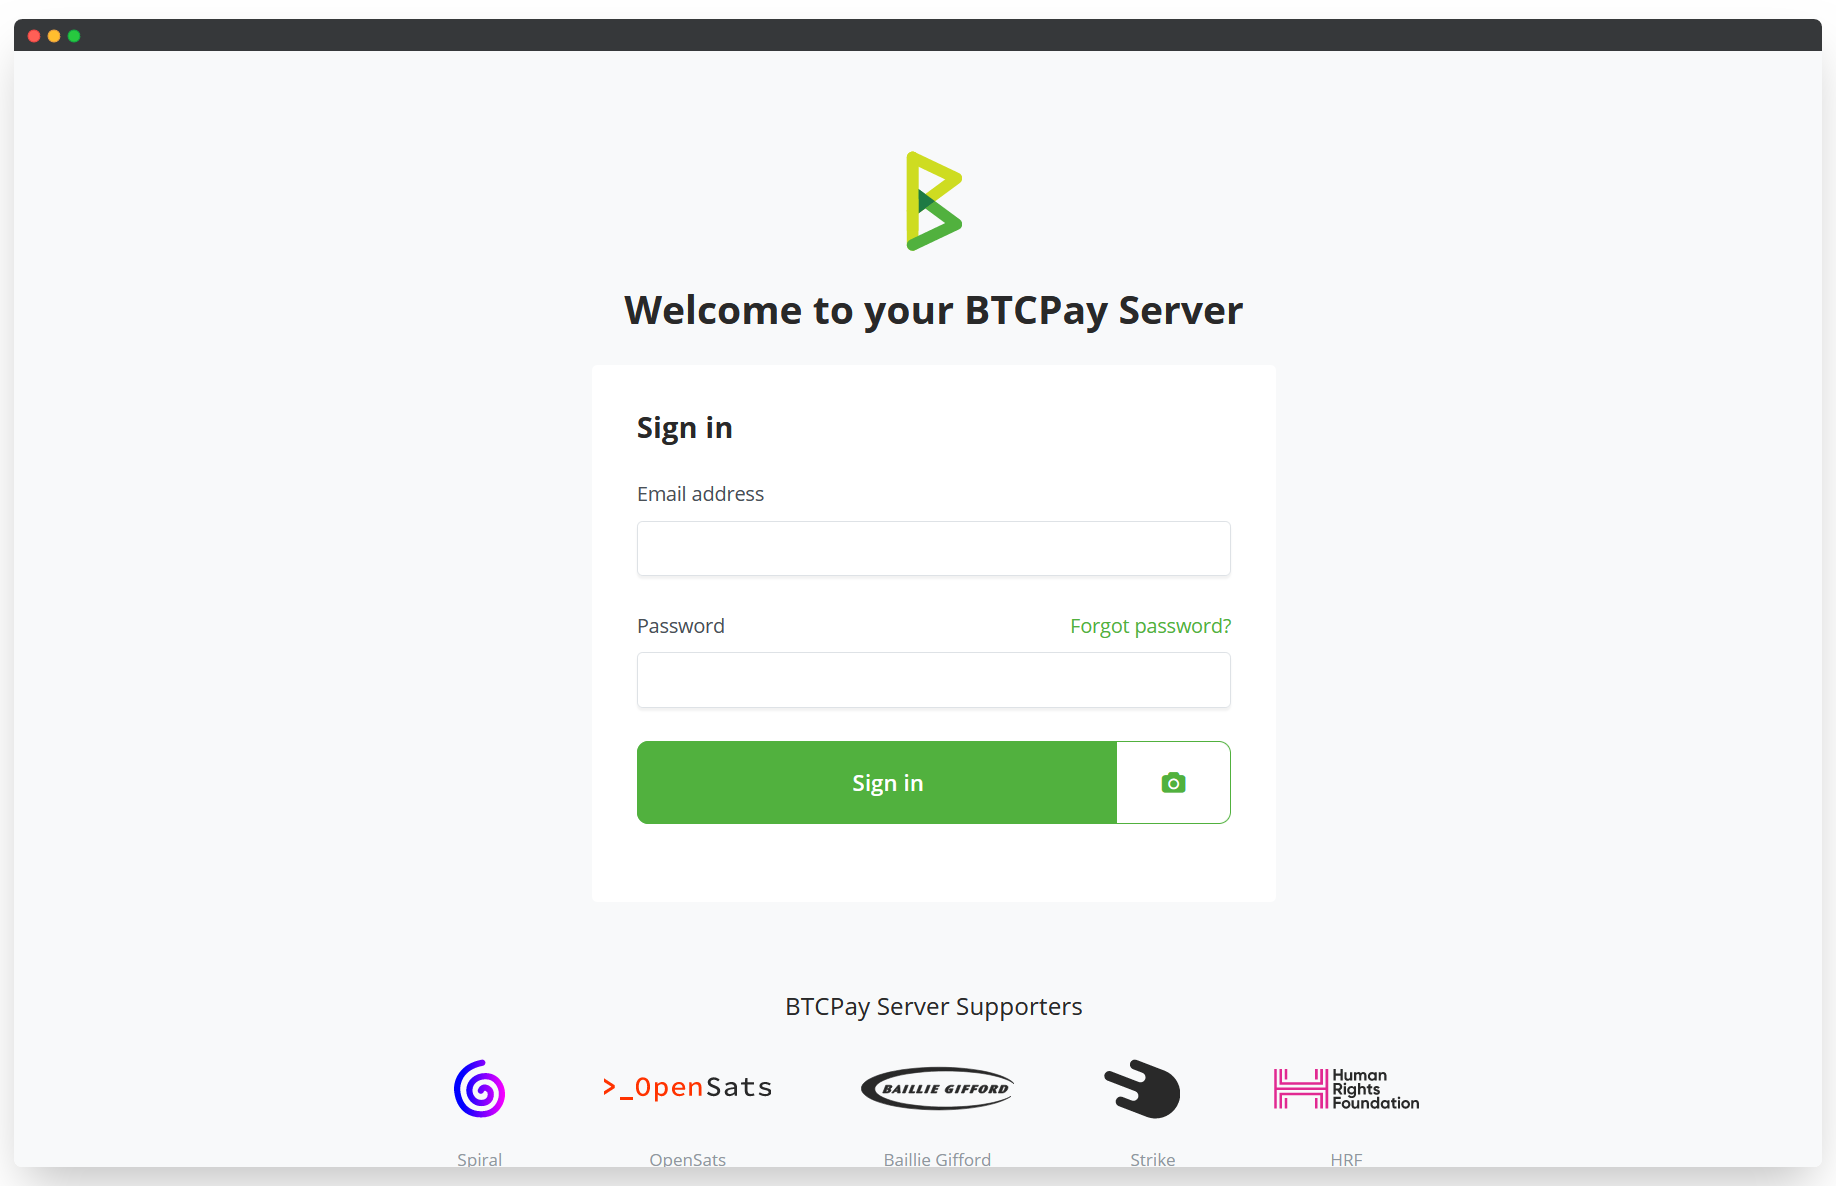 Self host your own BTCPay server with a few clicks